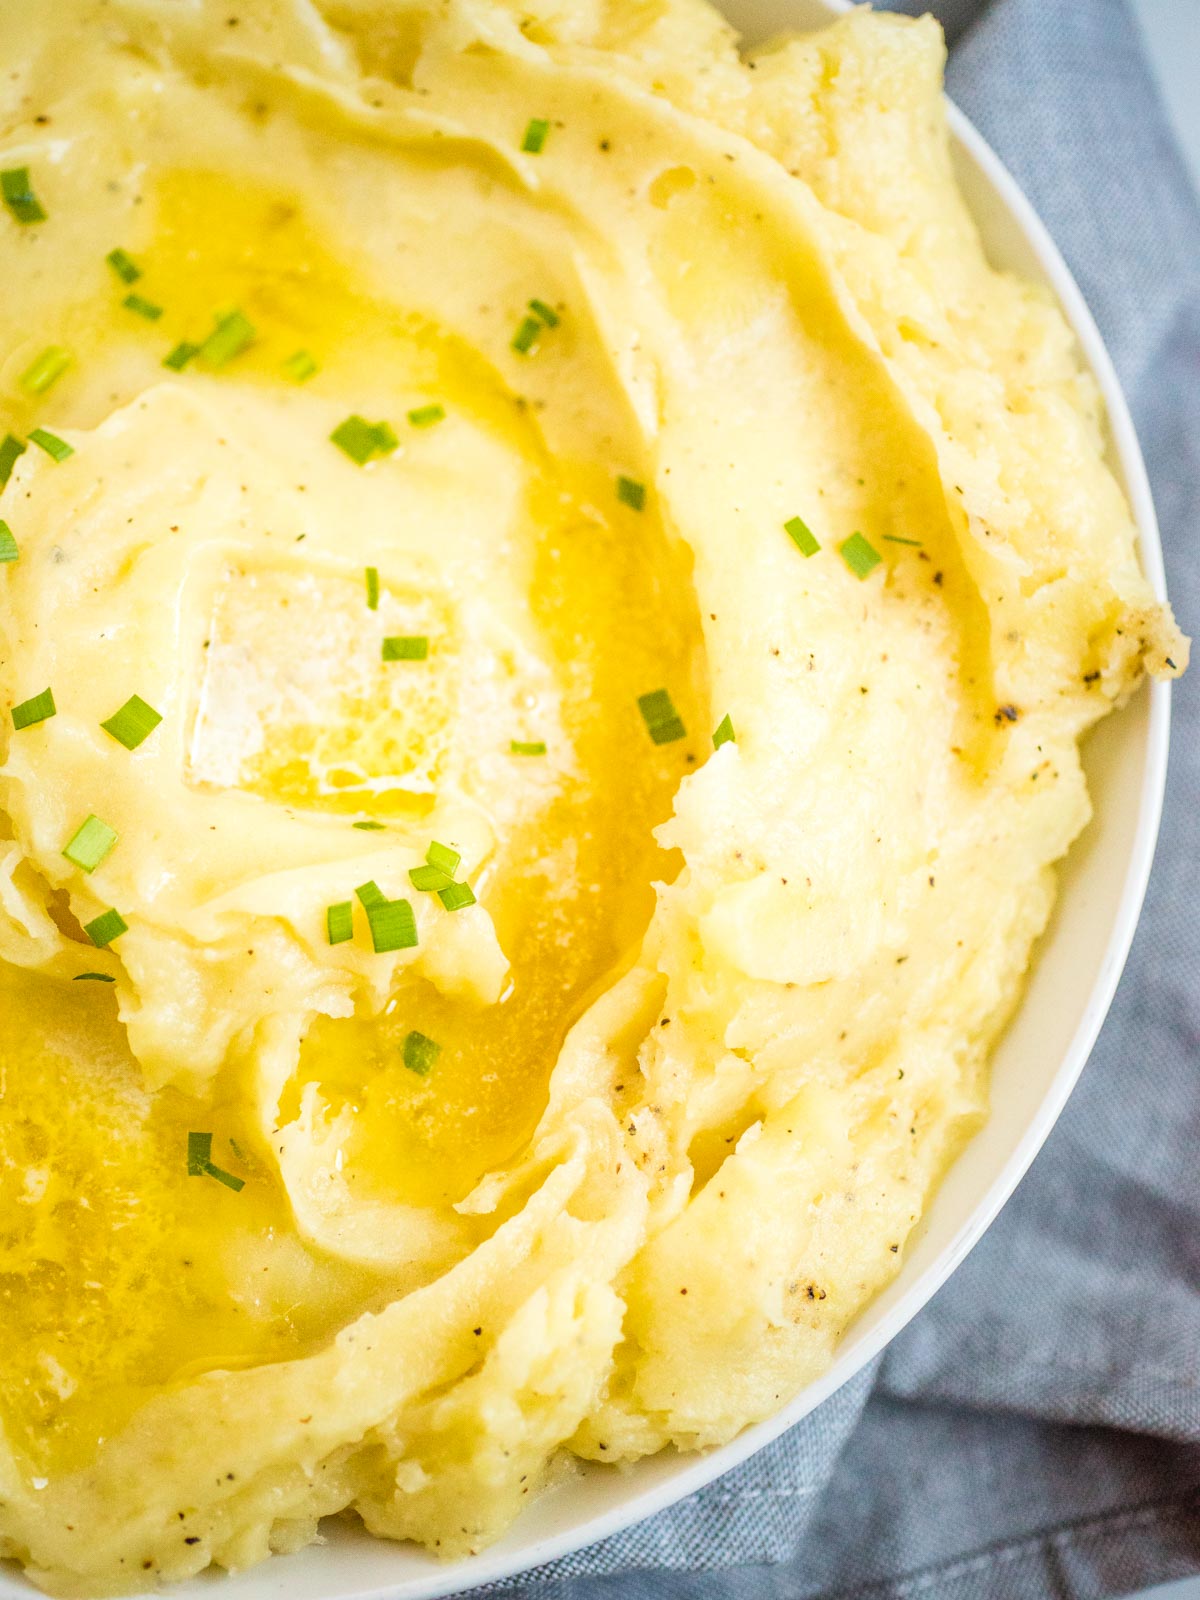 mashed potatoes with melted butter in a white dish